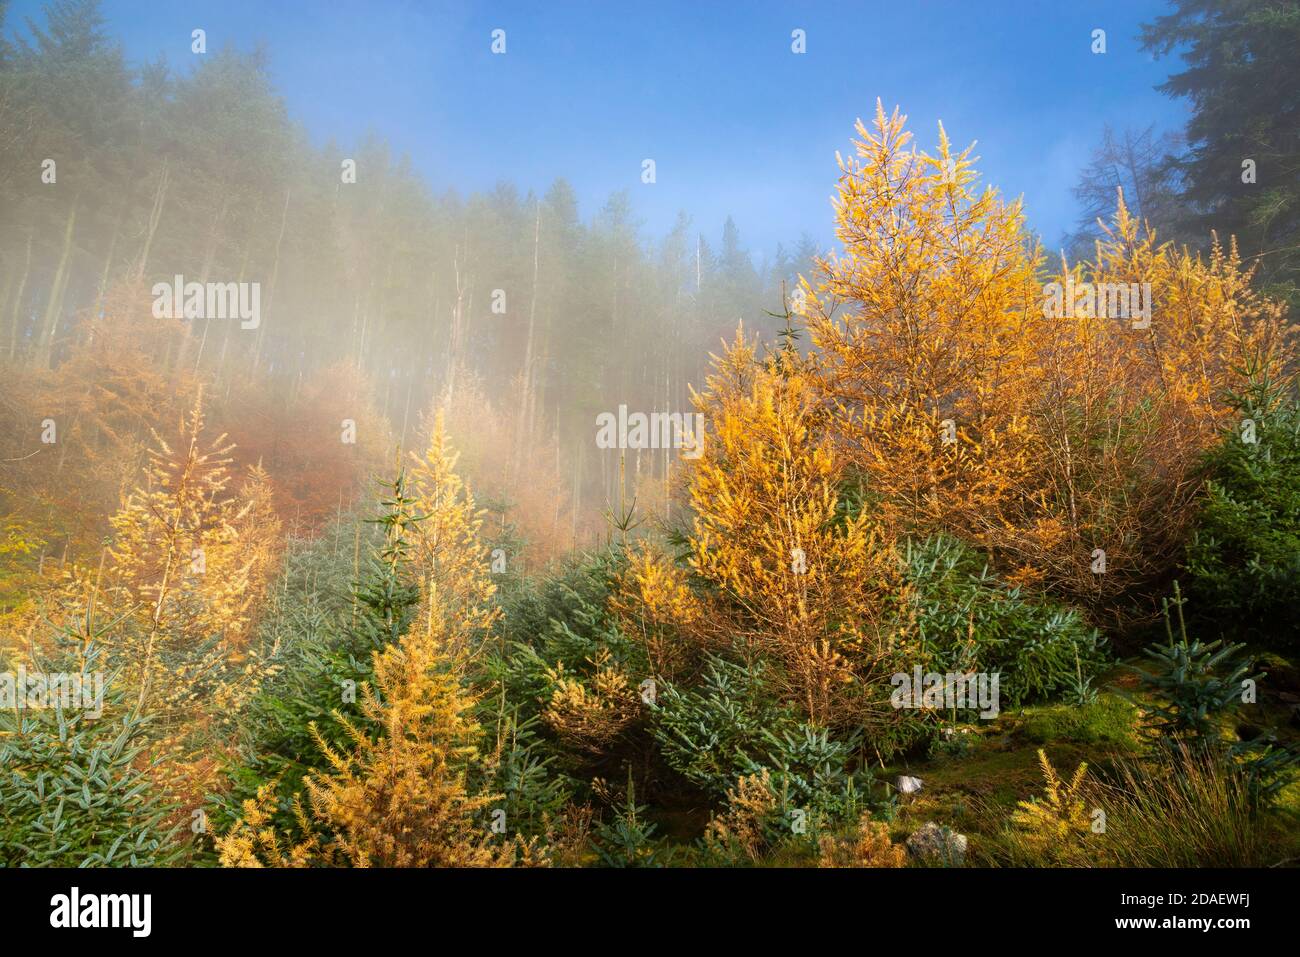 Bright autumn colour in forest trees at Snake Woodlands, Peak District, Derbyshire, England. Stock Photo